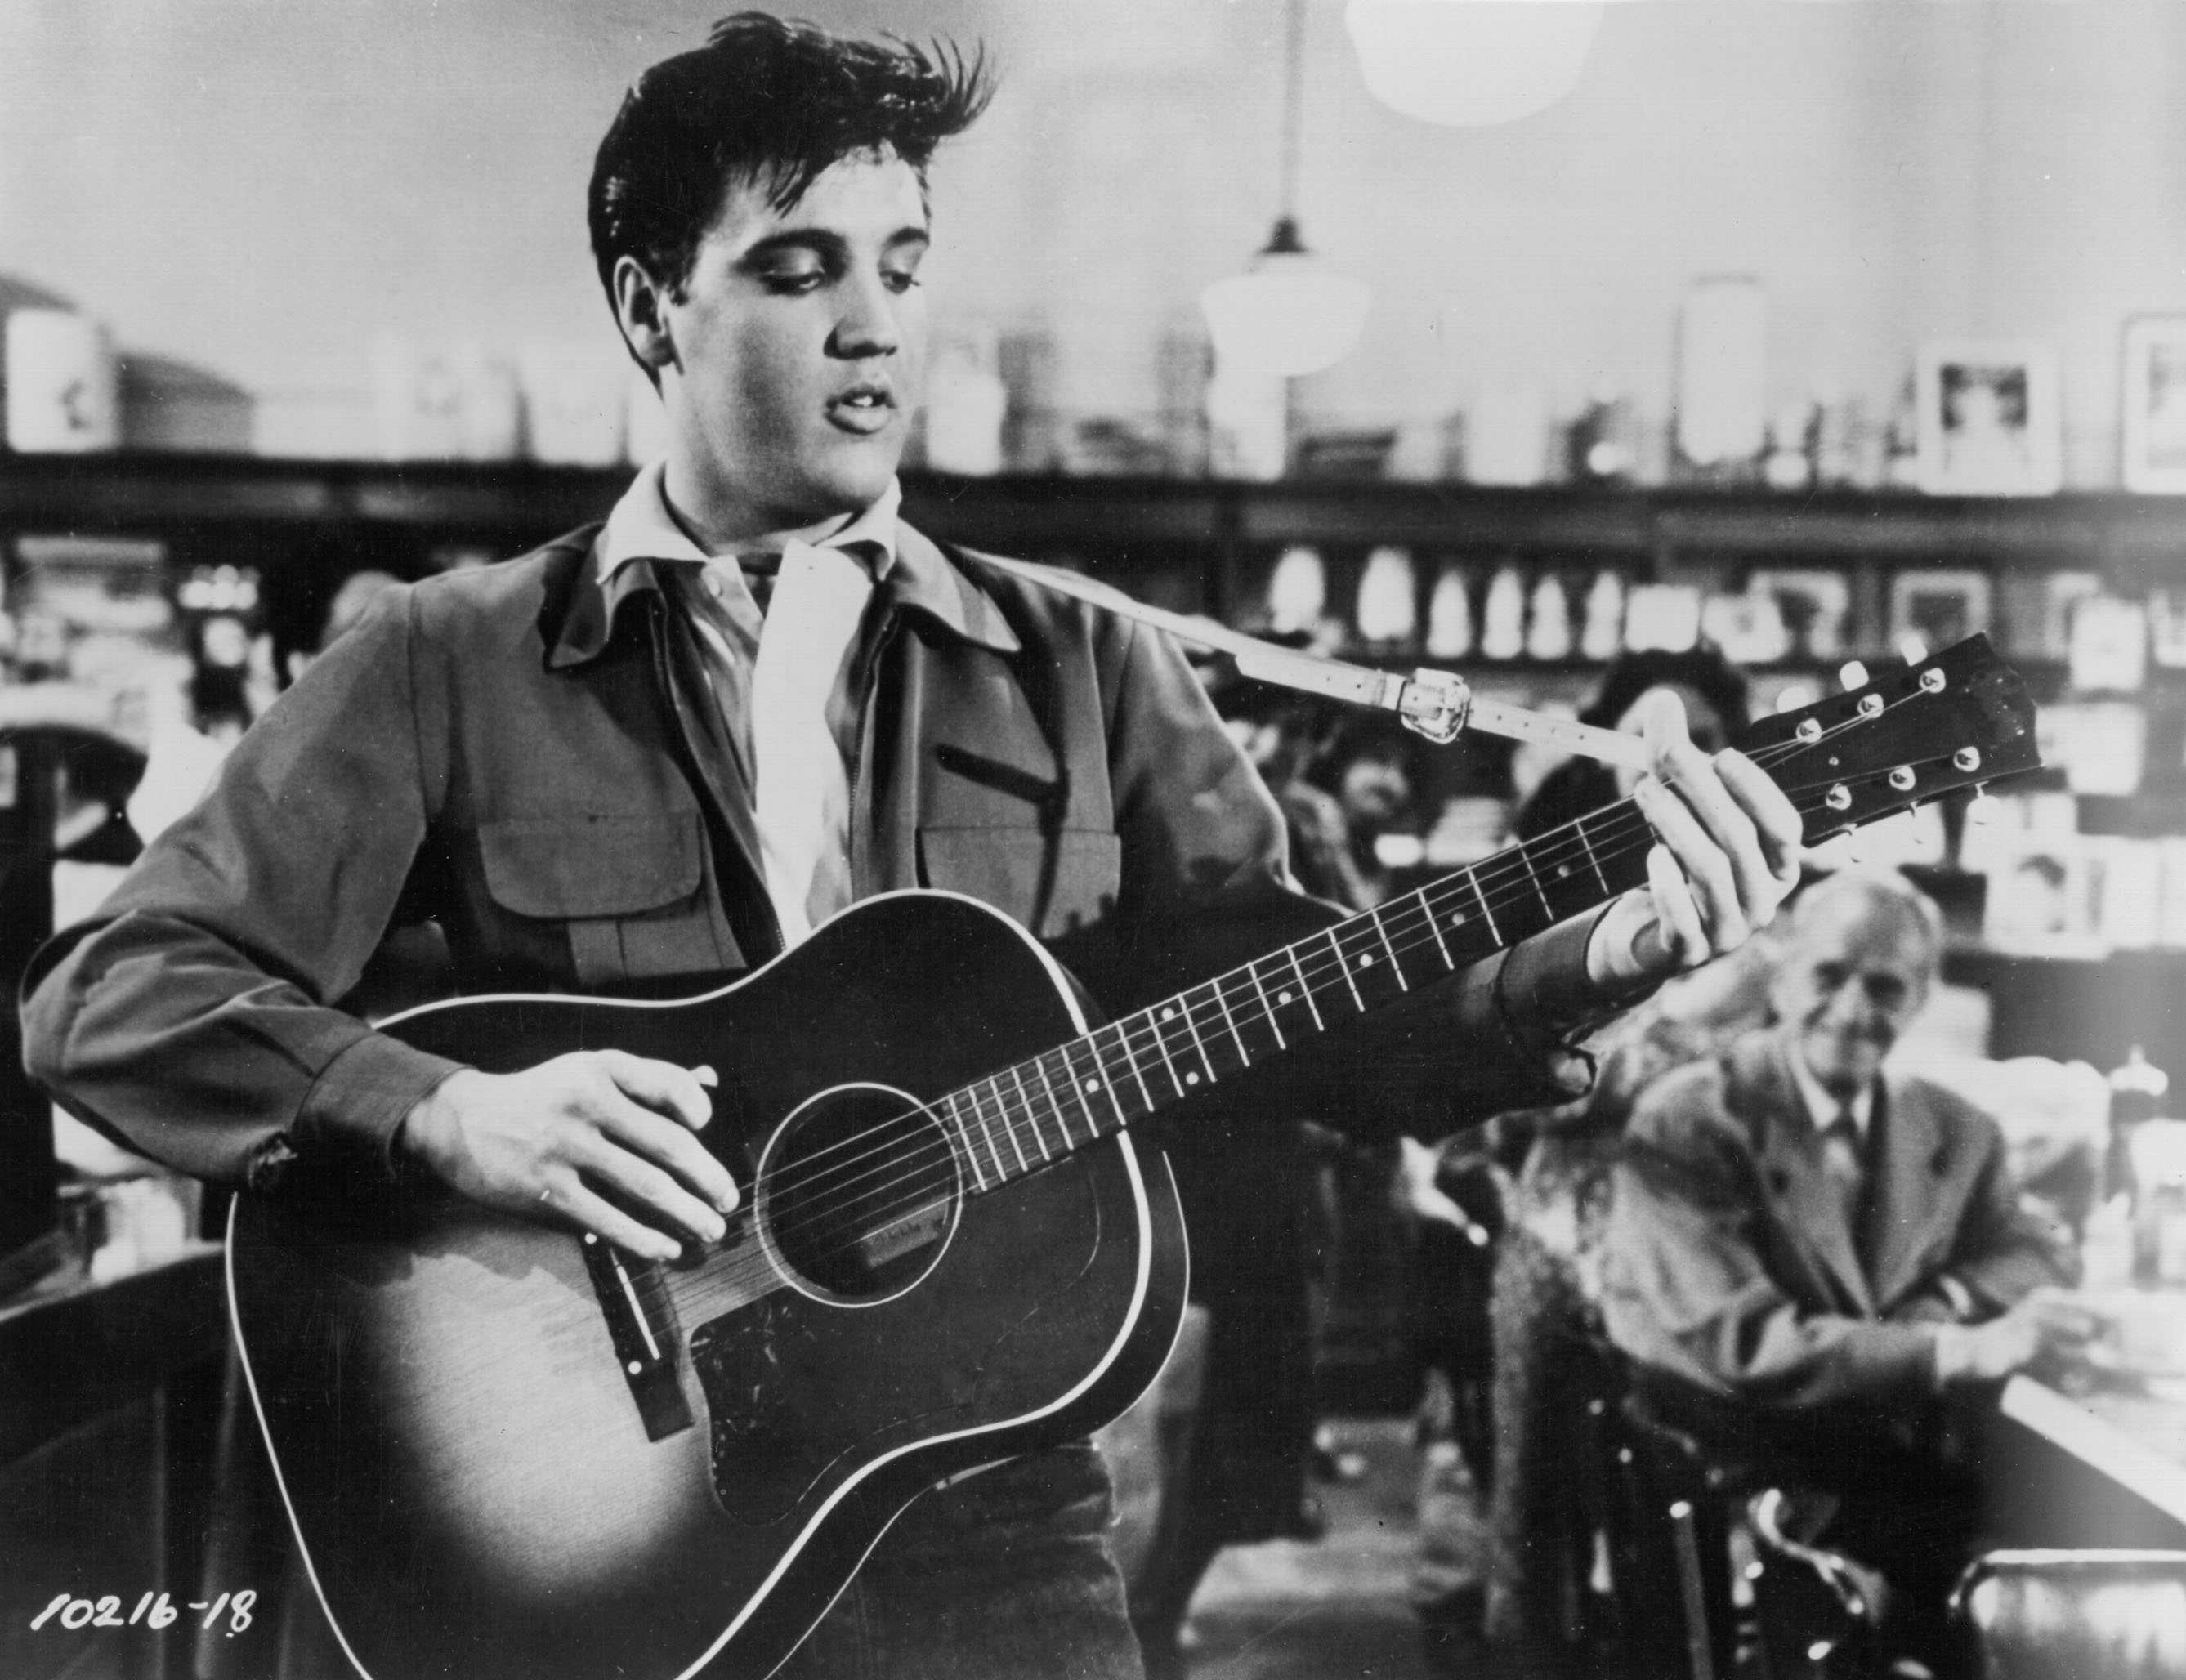 Elvis Presley during his "That's All Right" era with a guitar